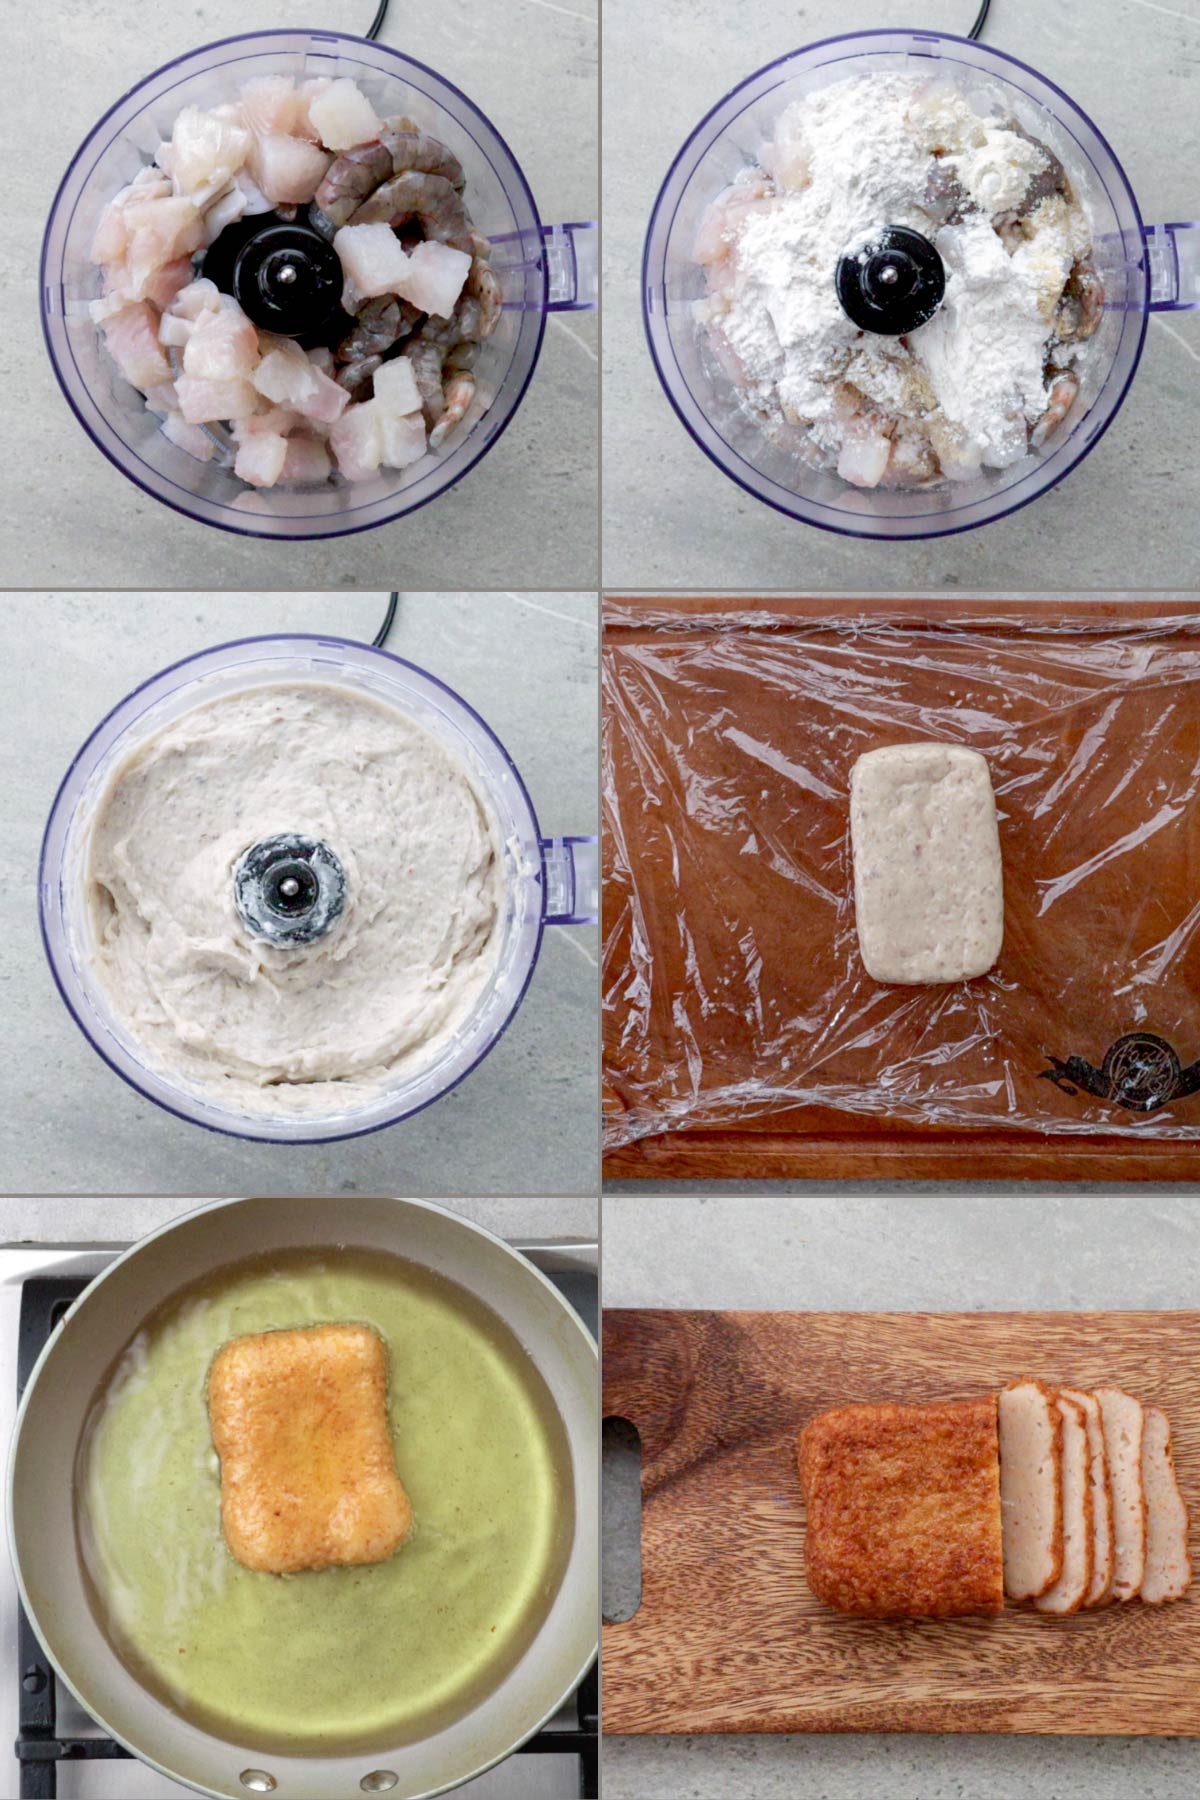 Steps on how to make Eomuk.